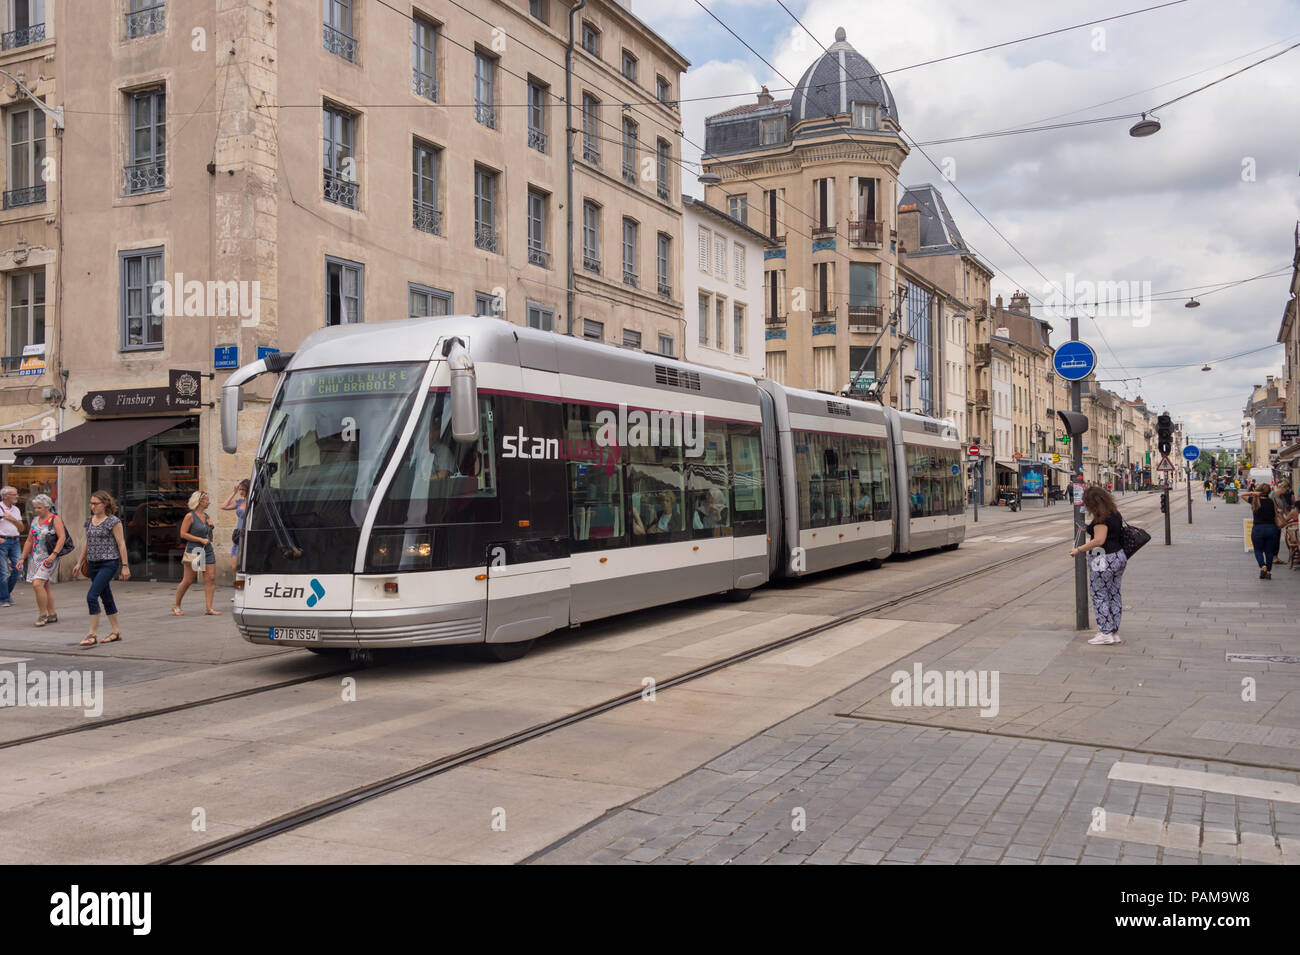 Nancy, France - 21 June 2018: Bombardier Guided Light Transit guided bus on Saint-Georges street. Stock Photo